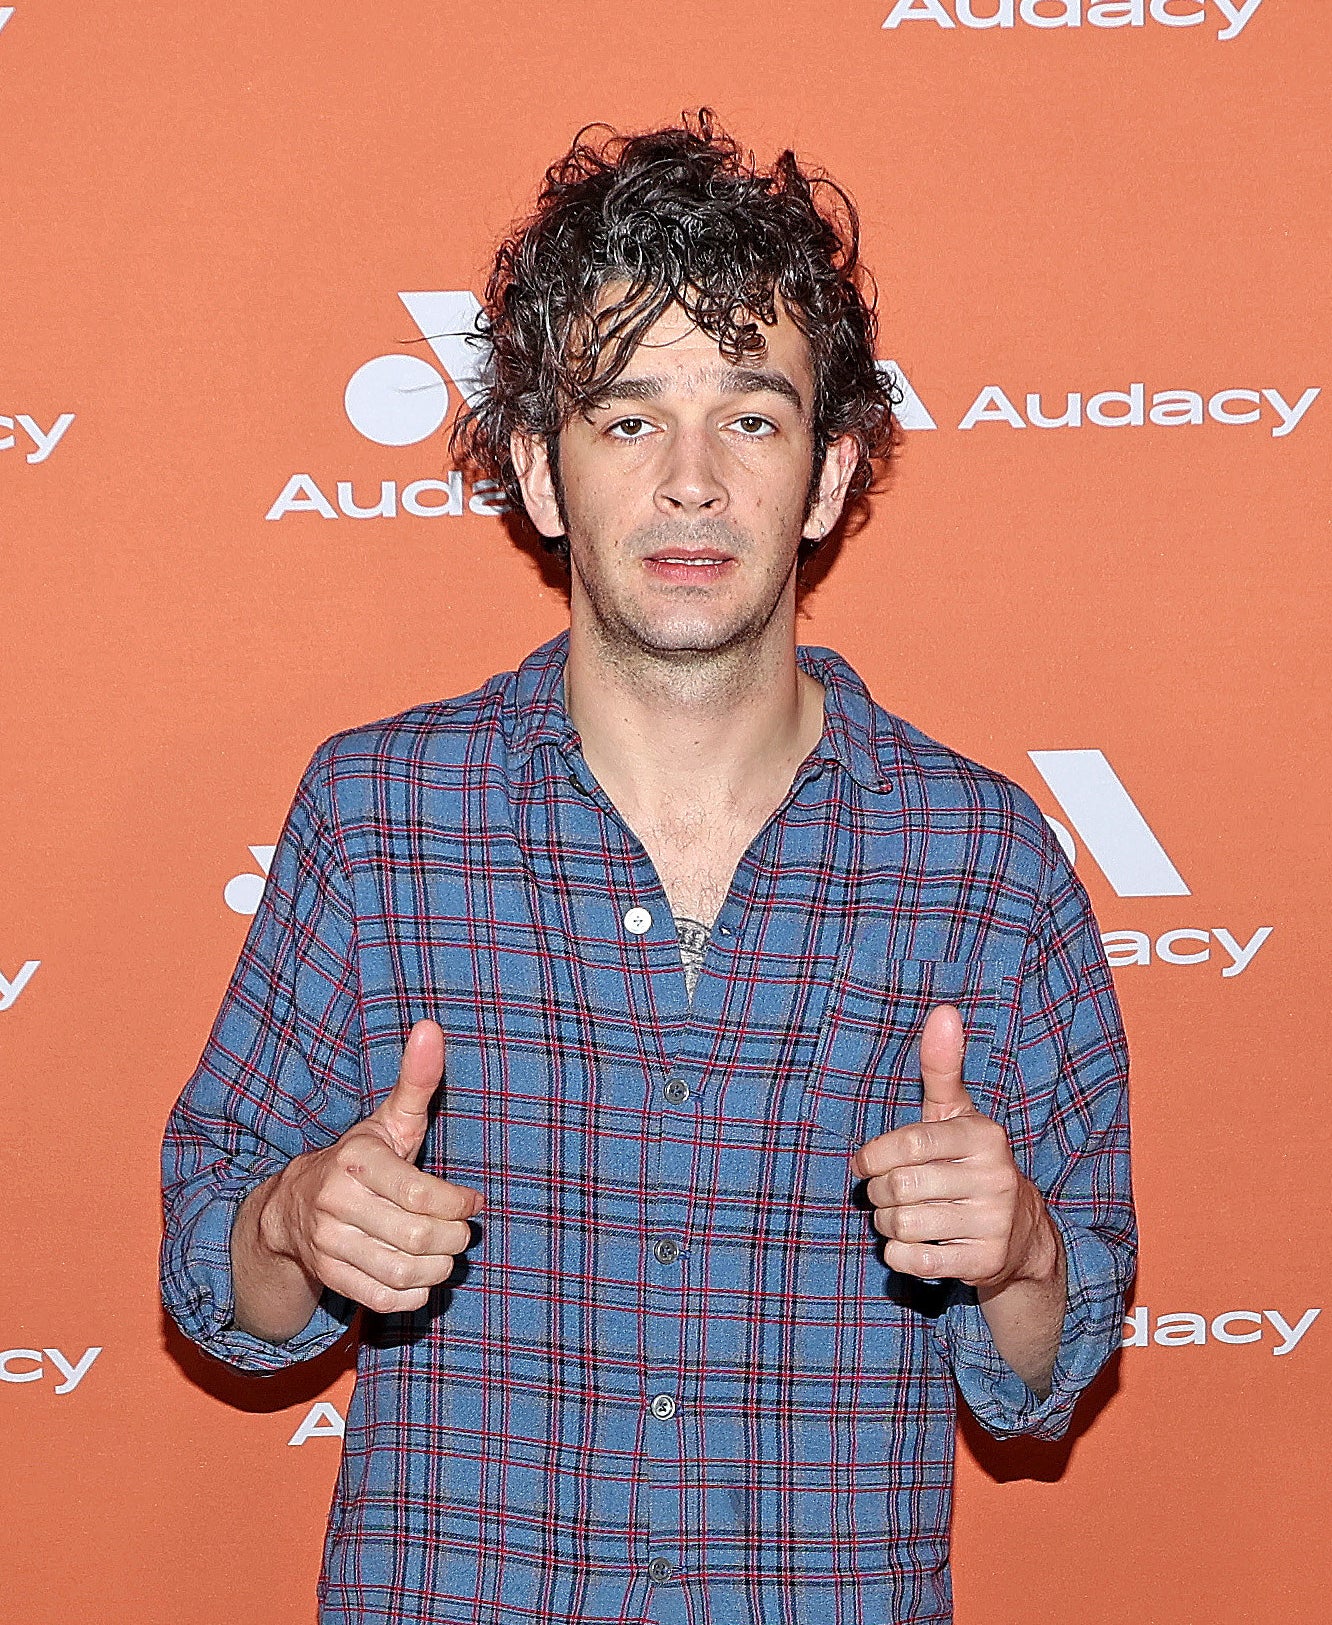 Matty giving two thumbs-up